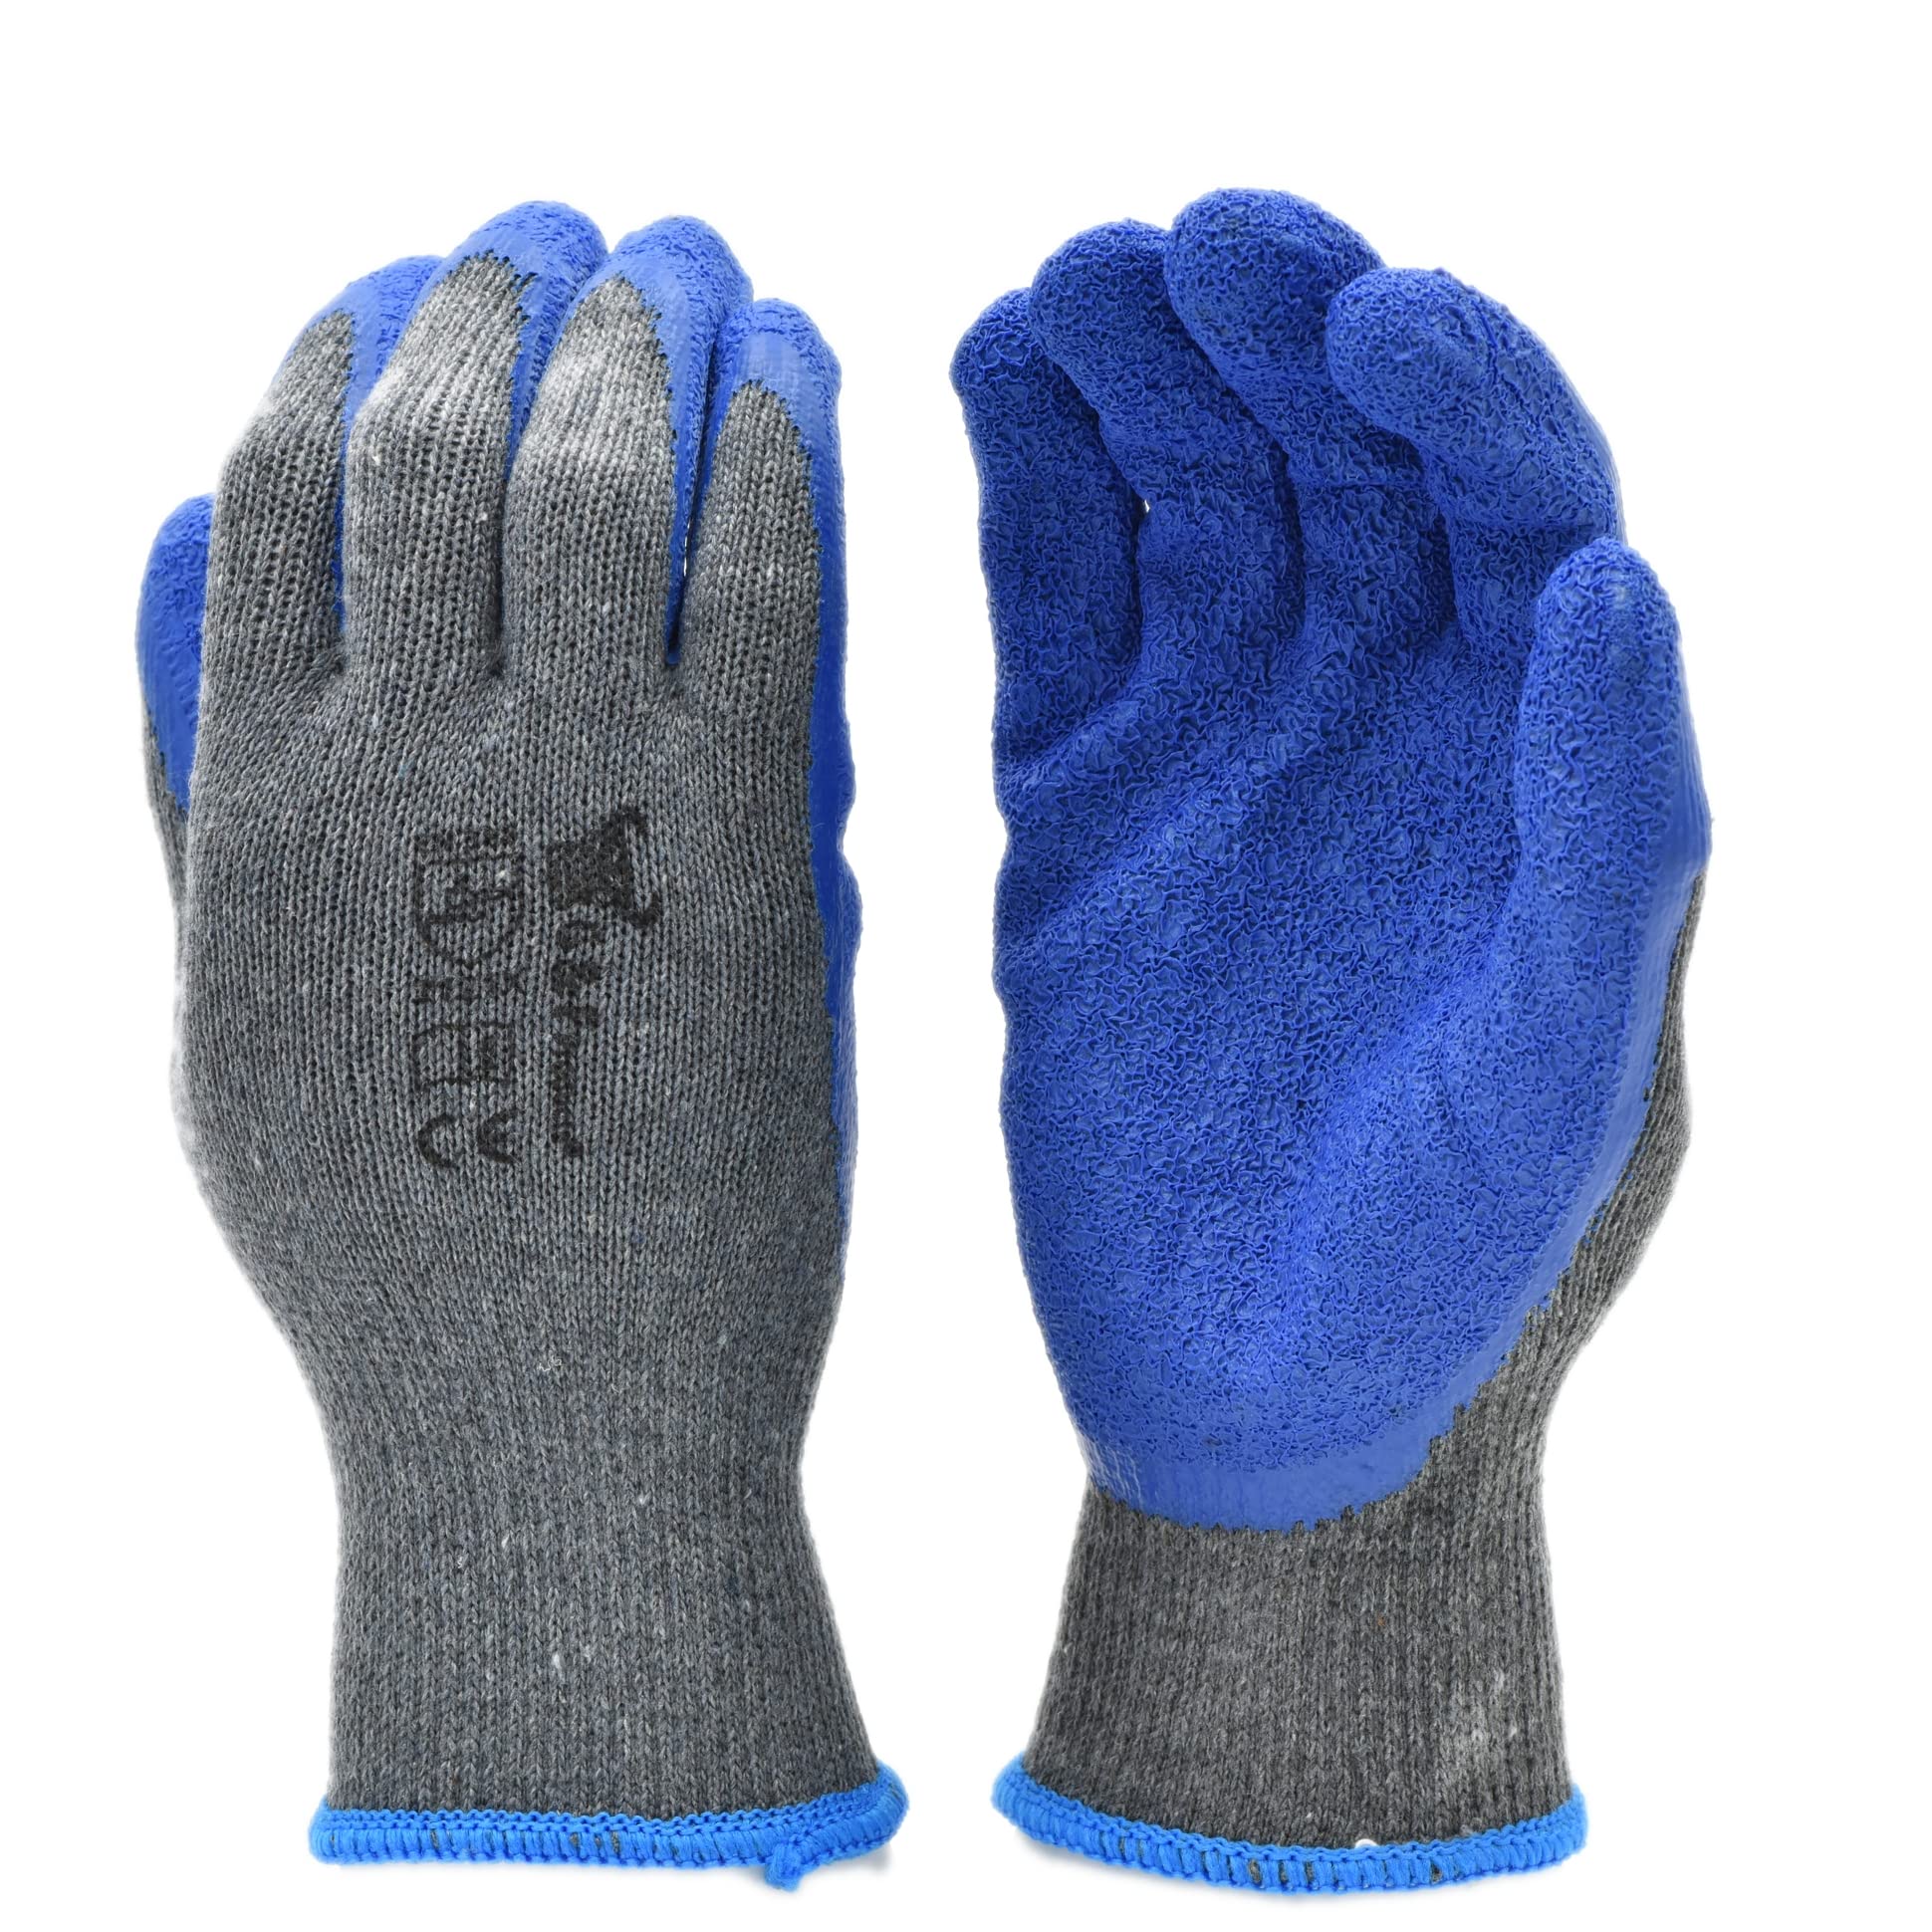 g & F Products - 3100M-10 120 Pairs Medium Rubber Latex Double coated Work gloves for construction, gardening gloves, heavy duty